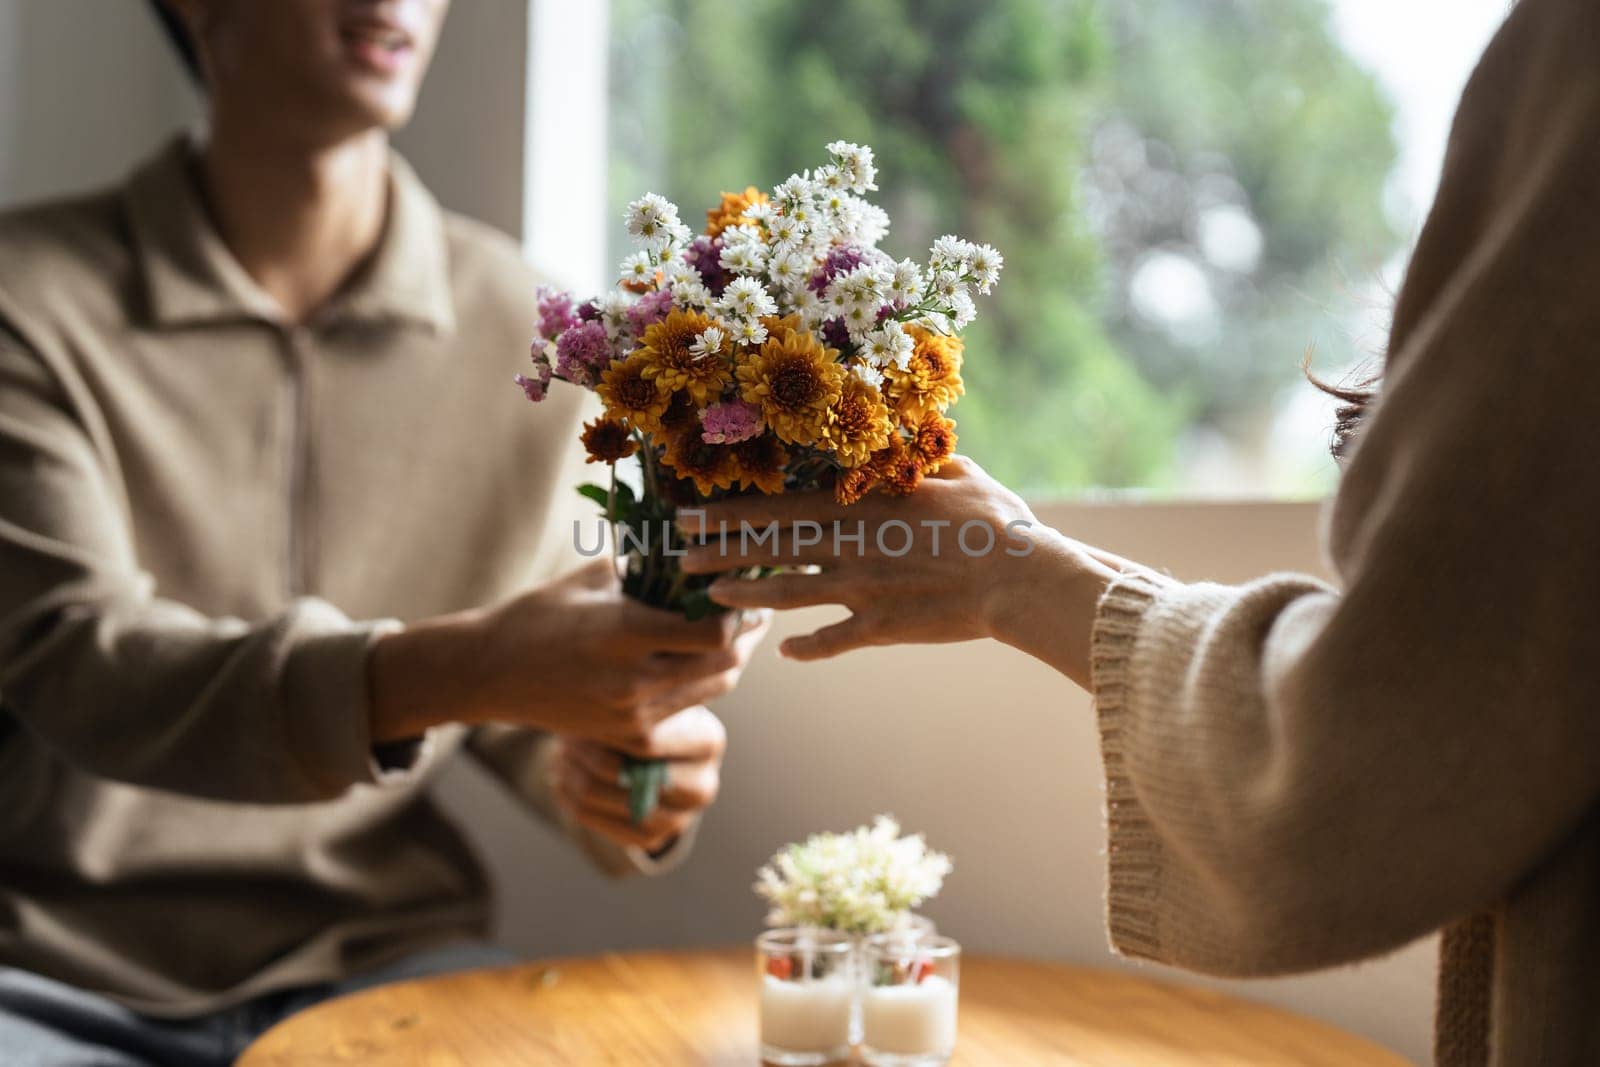 Young couple Hug and giving flower on Valentine's Day. Romantic day together. Valentine's Day concept by itchaznong